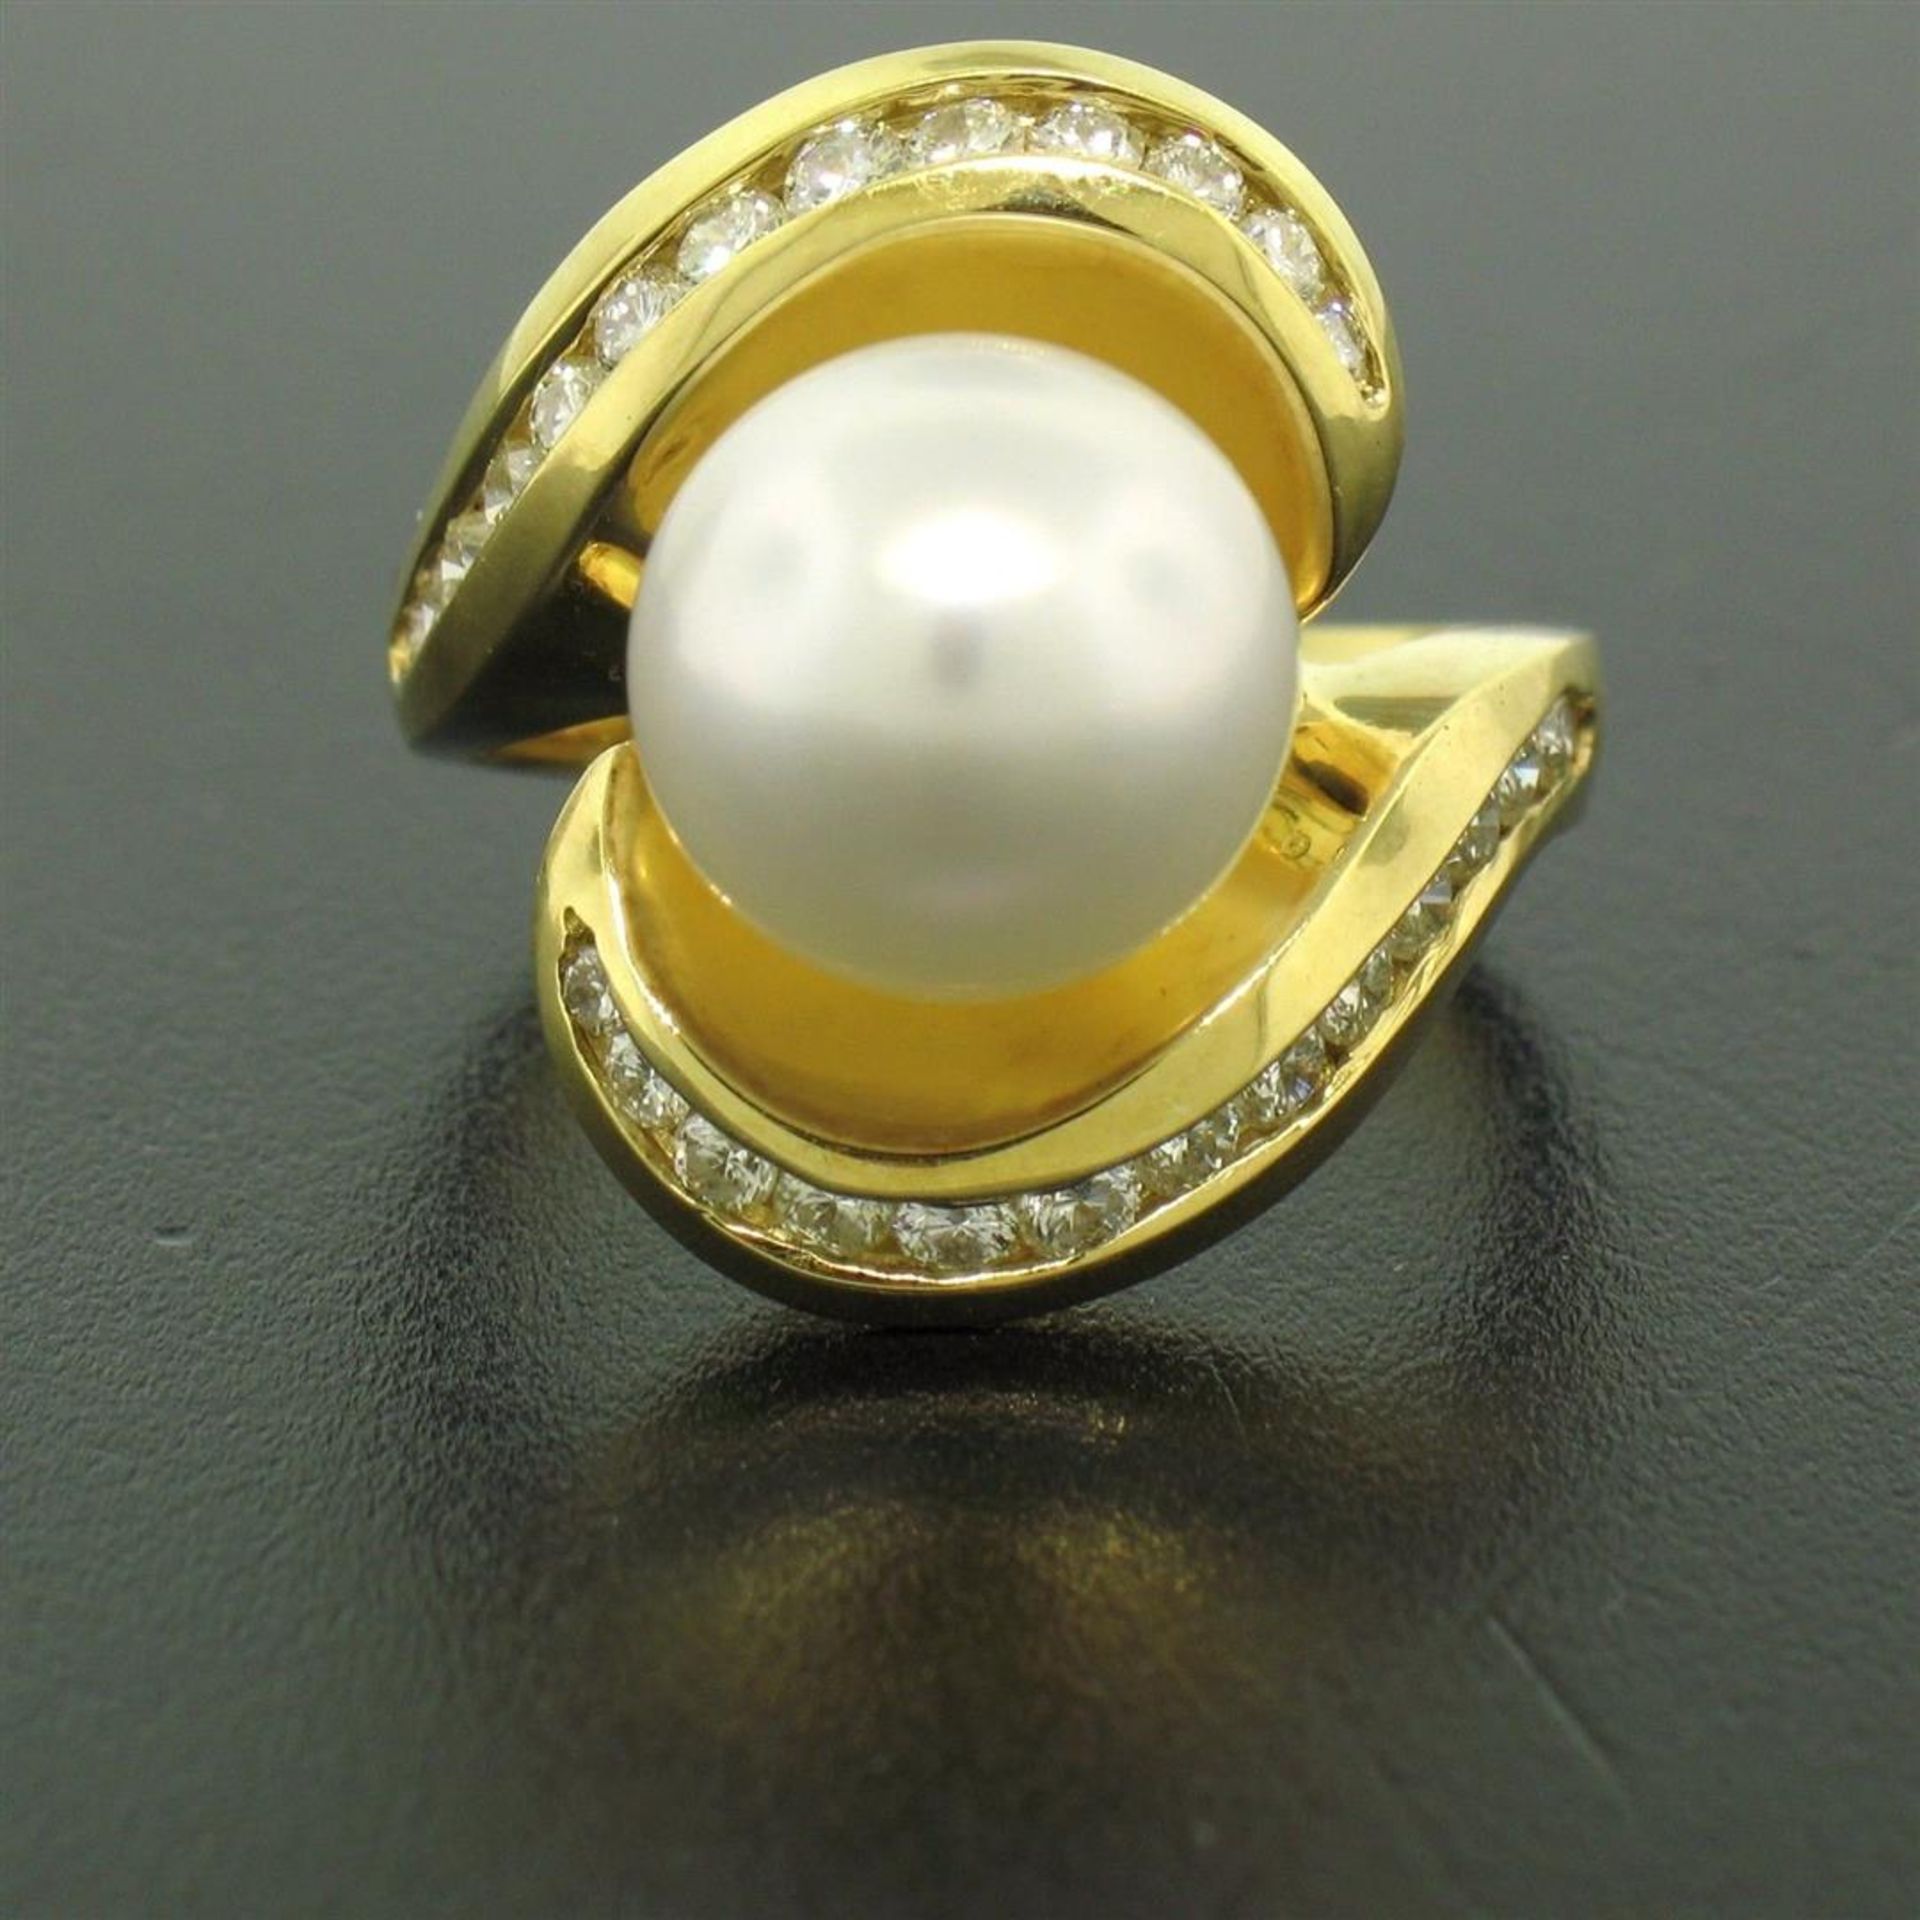 Large 18k Yellow Gold 10.6mm Round White Pearl Solitaire & Diamond Cocktail Ring - Image 6 of 8